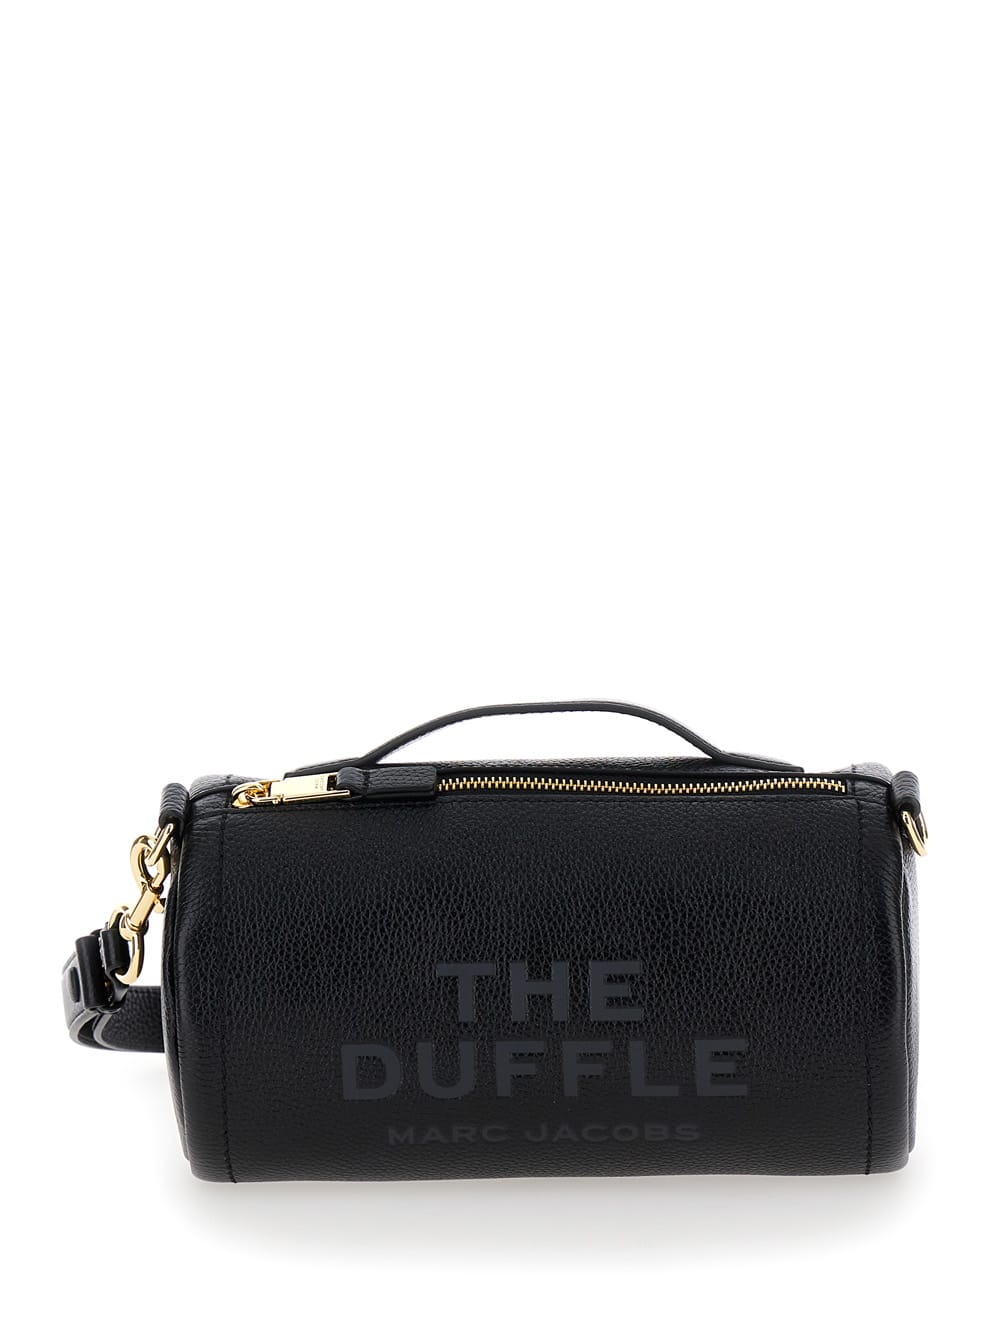 Marc Jacobs The Duffle In Black